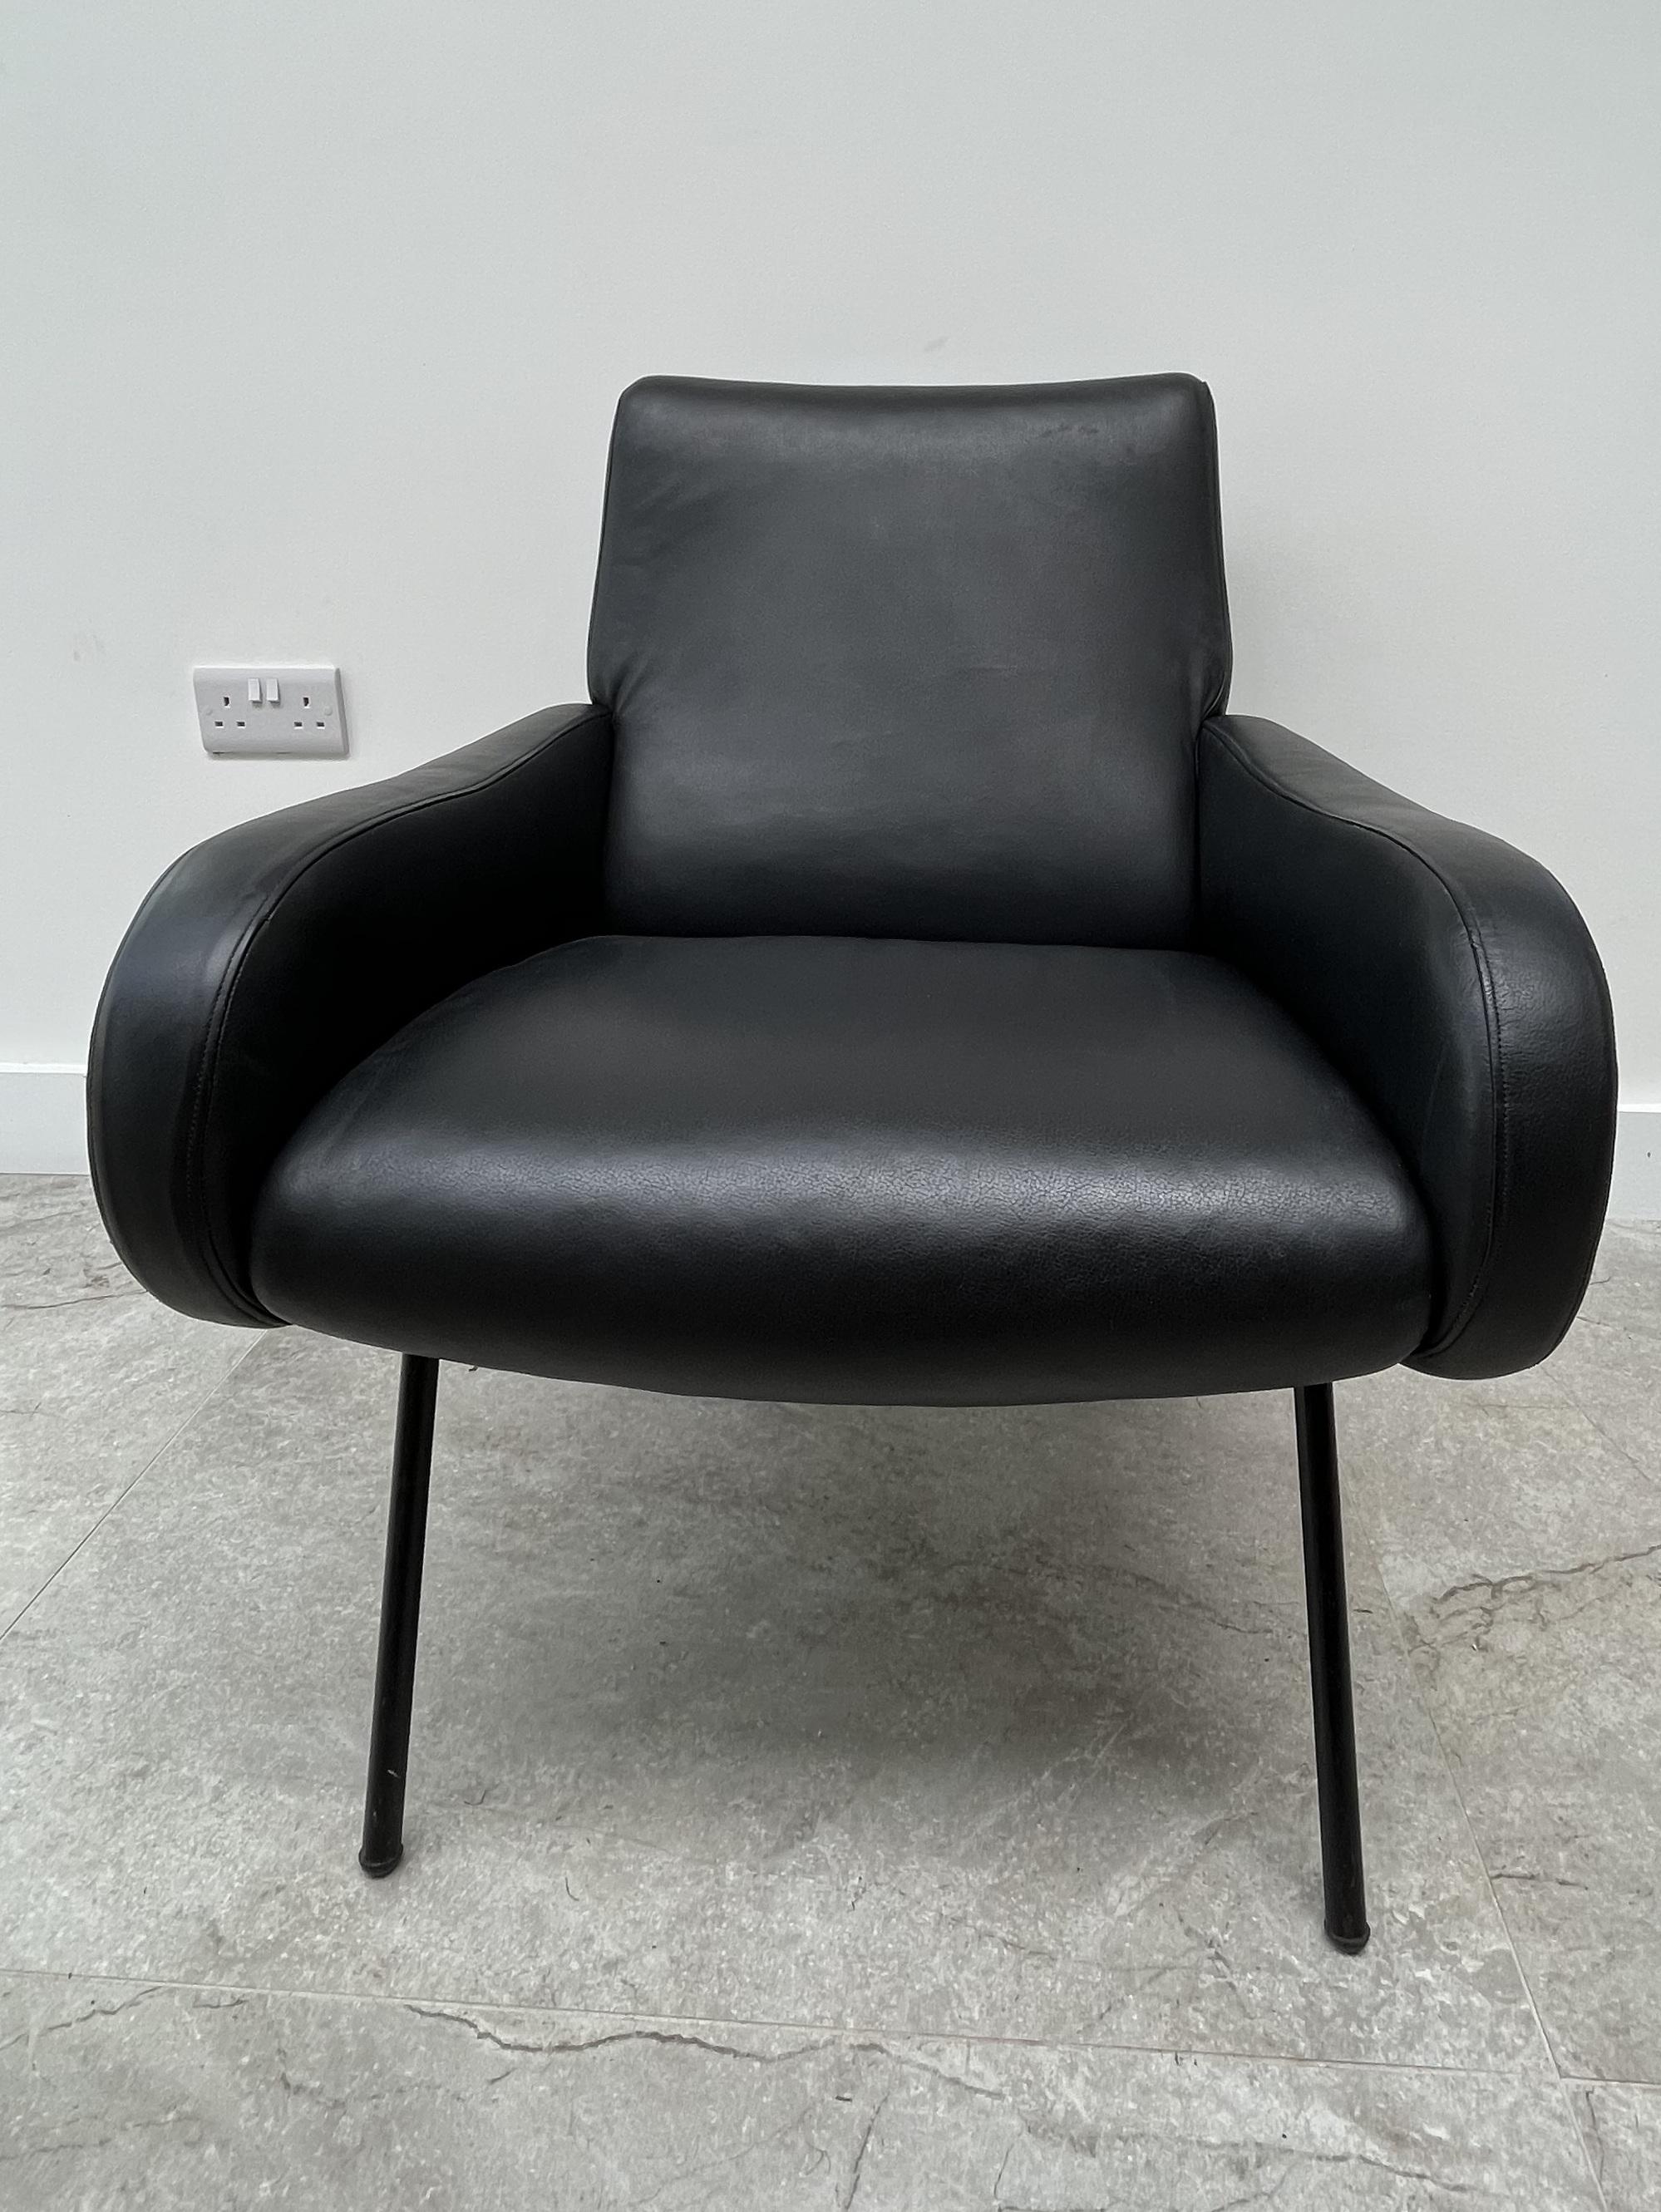 Originally designed by Marco Zanuso in 1951 for Arflex, France.

The chair is in very good condition with the black leather upholstery showing only light wear. The legs have some oxidation and scuffing to the black finish.

The chair retains